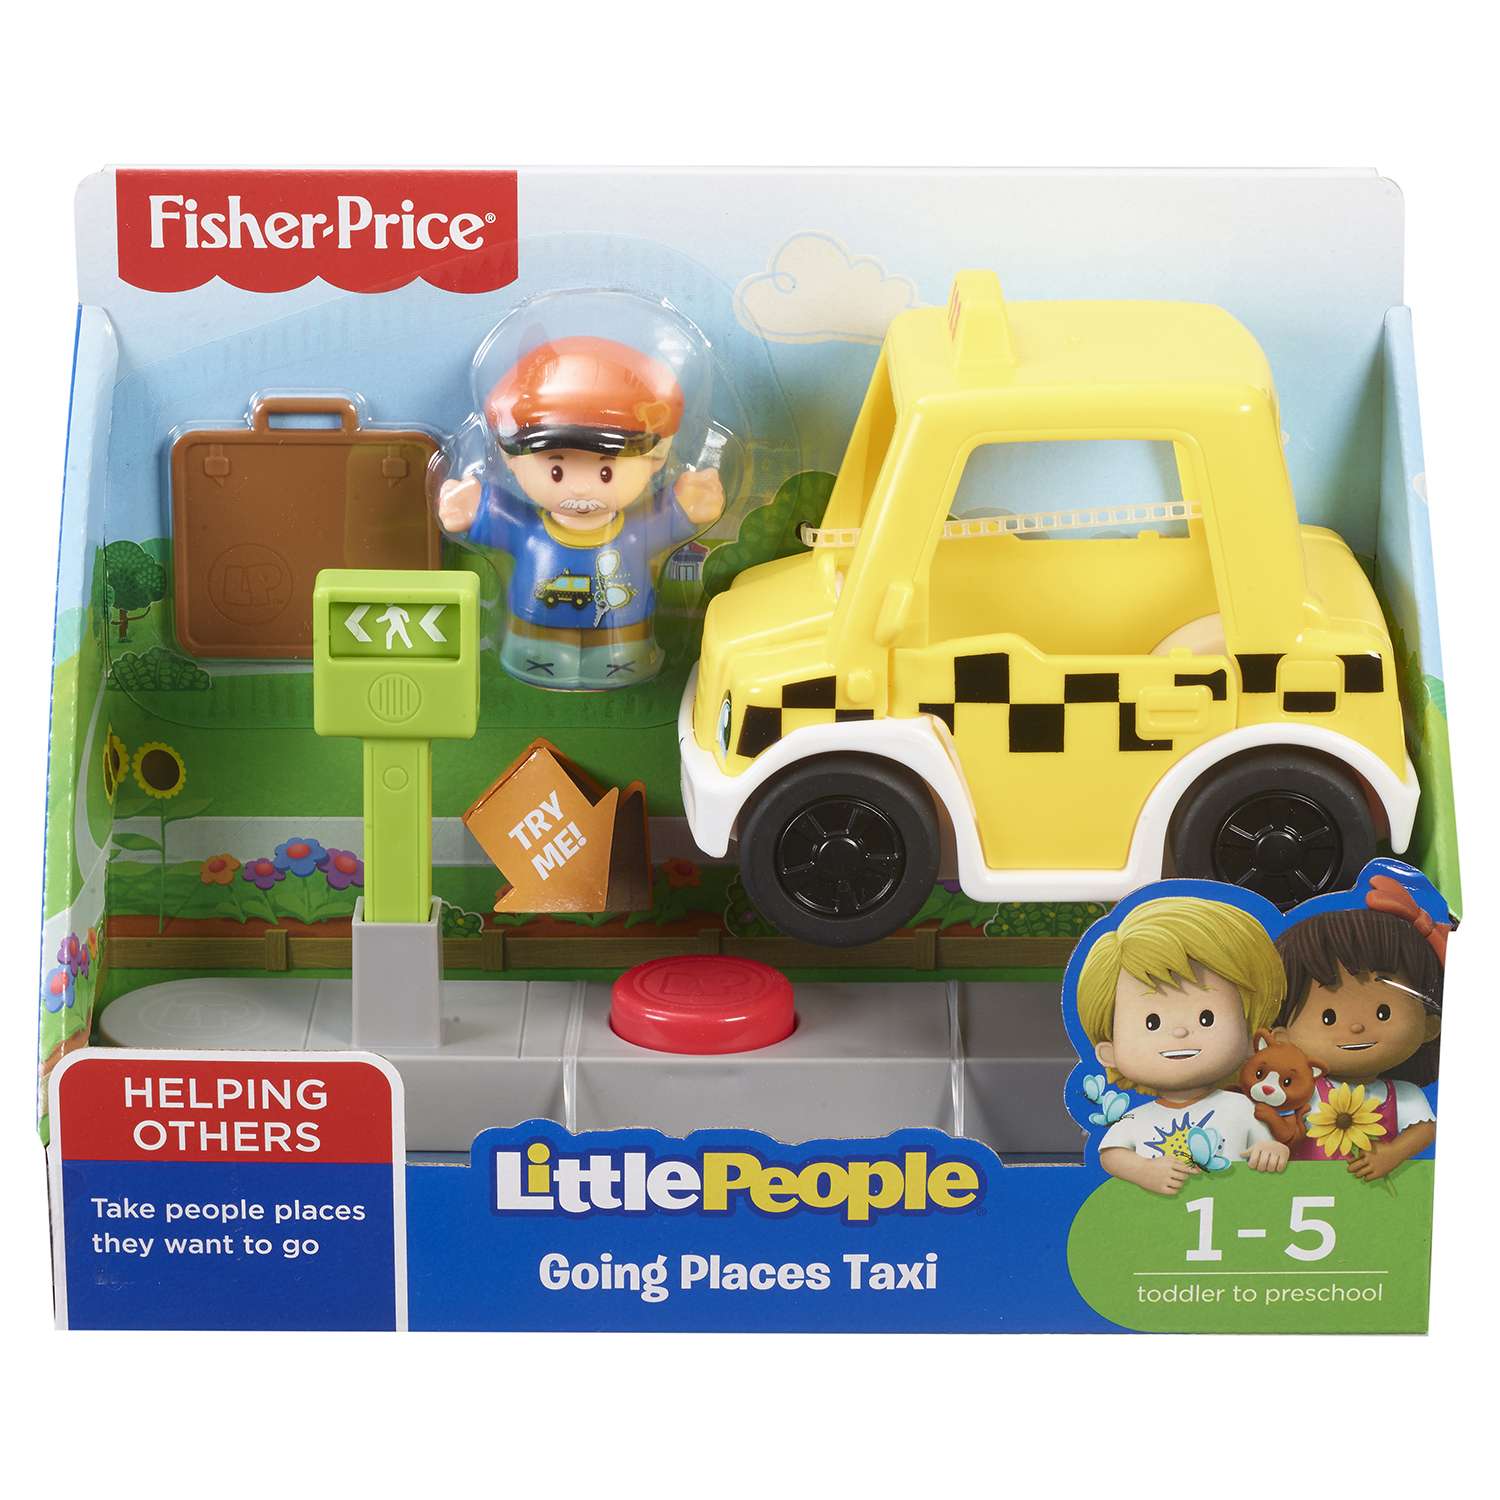 Игровой набор Little People Fisher-Price Going Places Taxi (DYT00) - фото 2